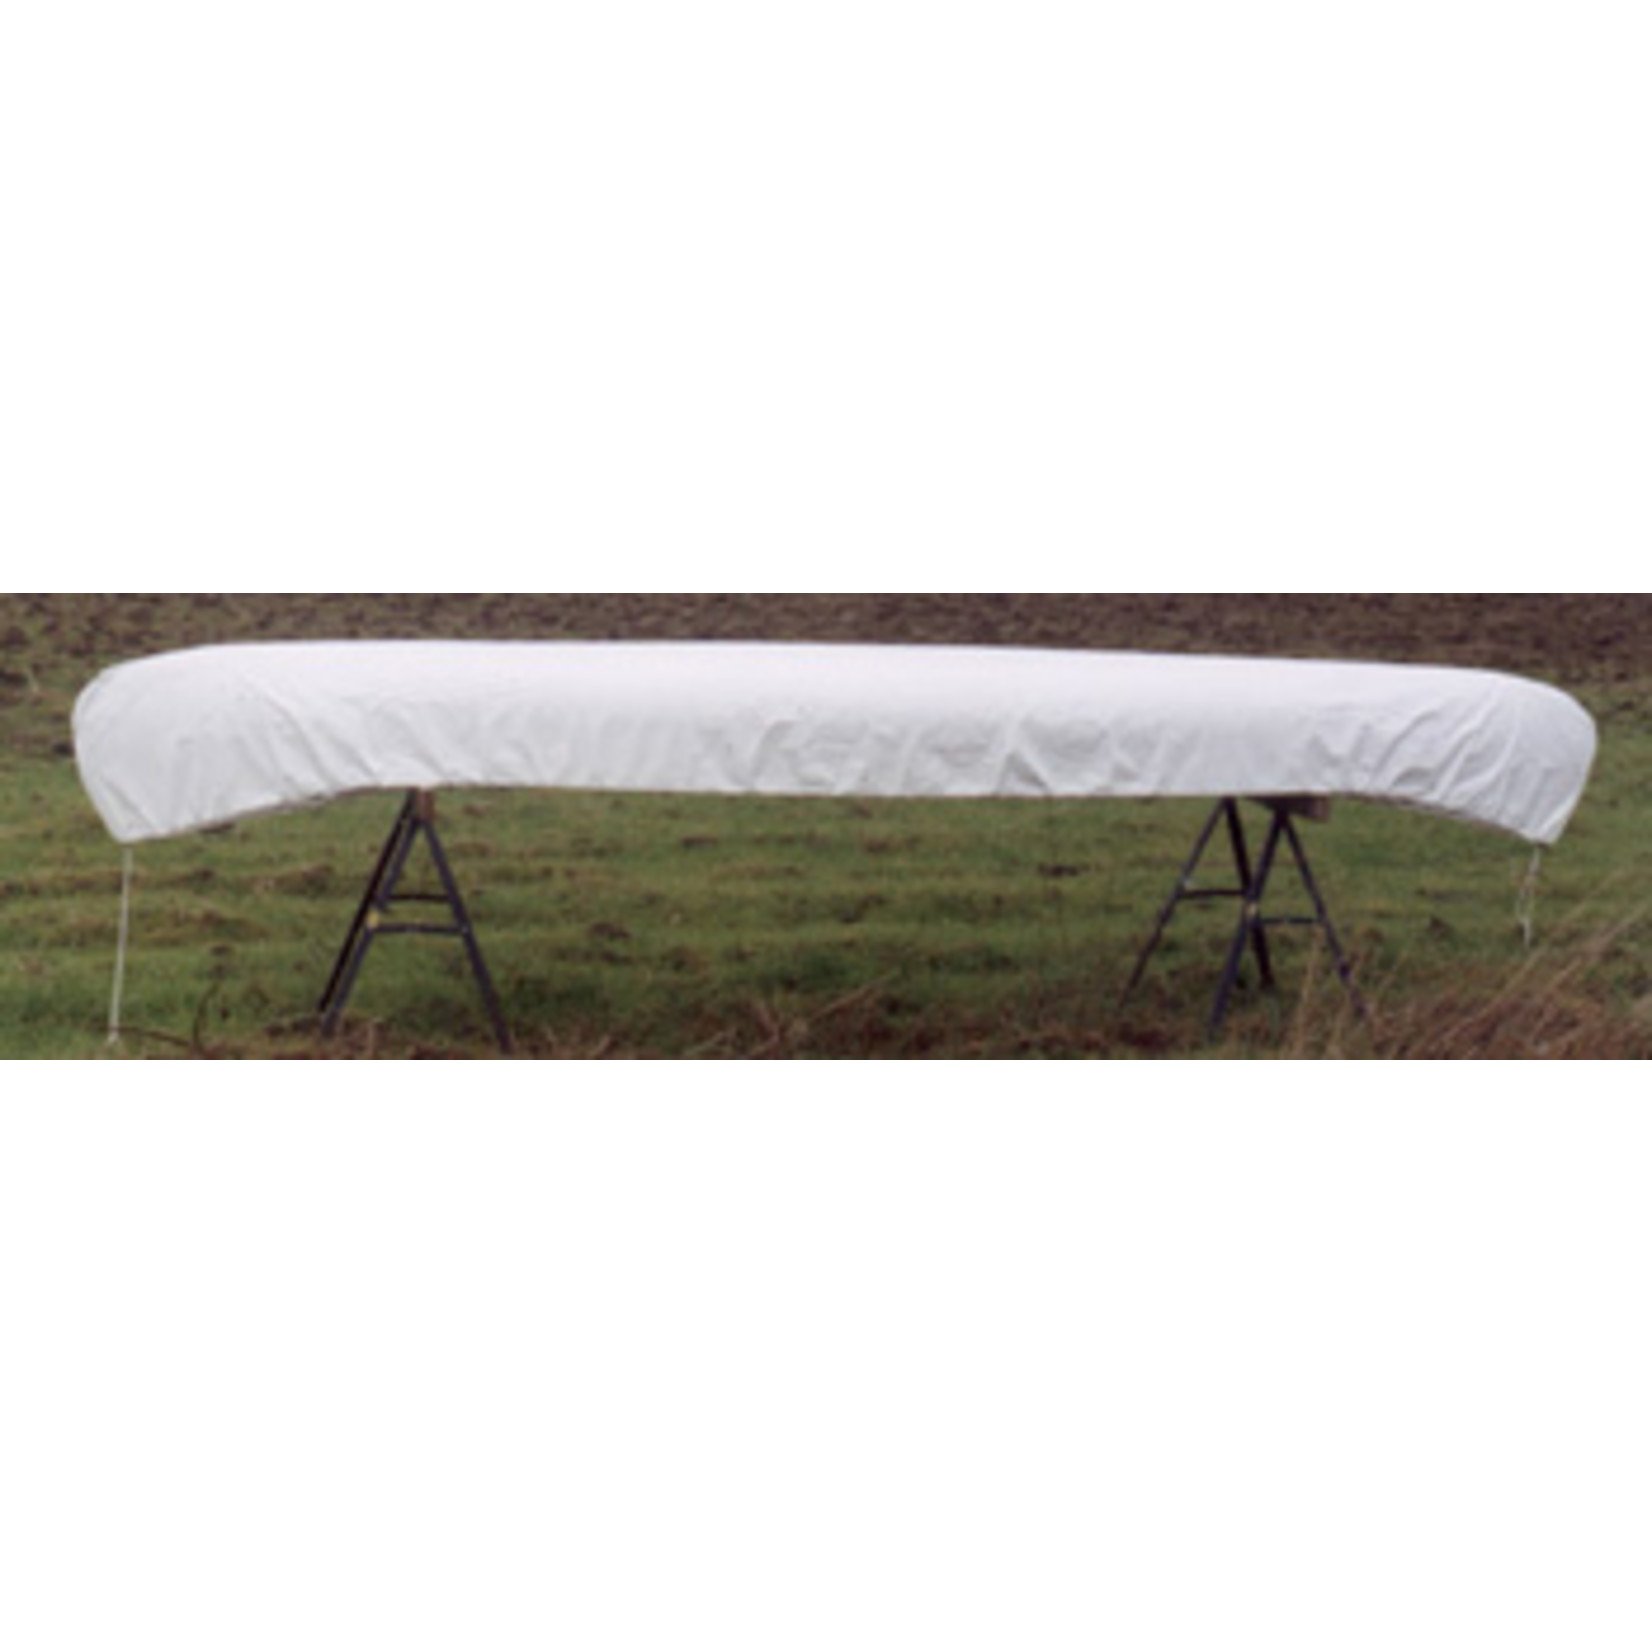 Whitewater Designs Canoe Storage Cover